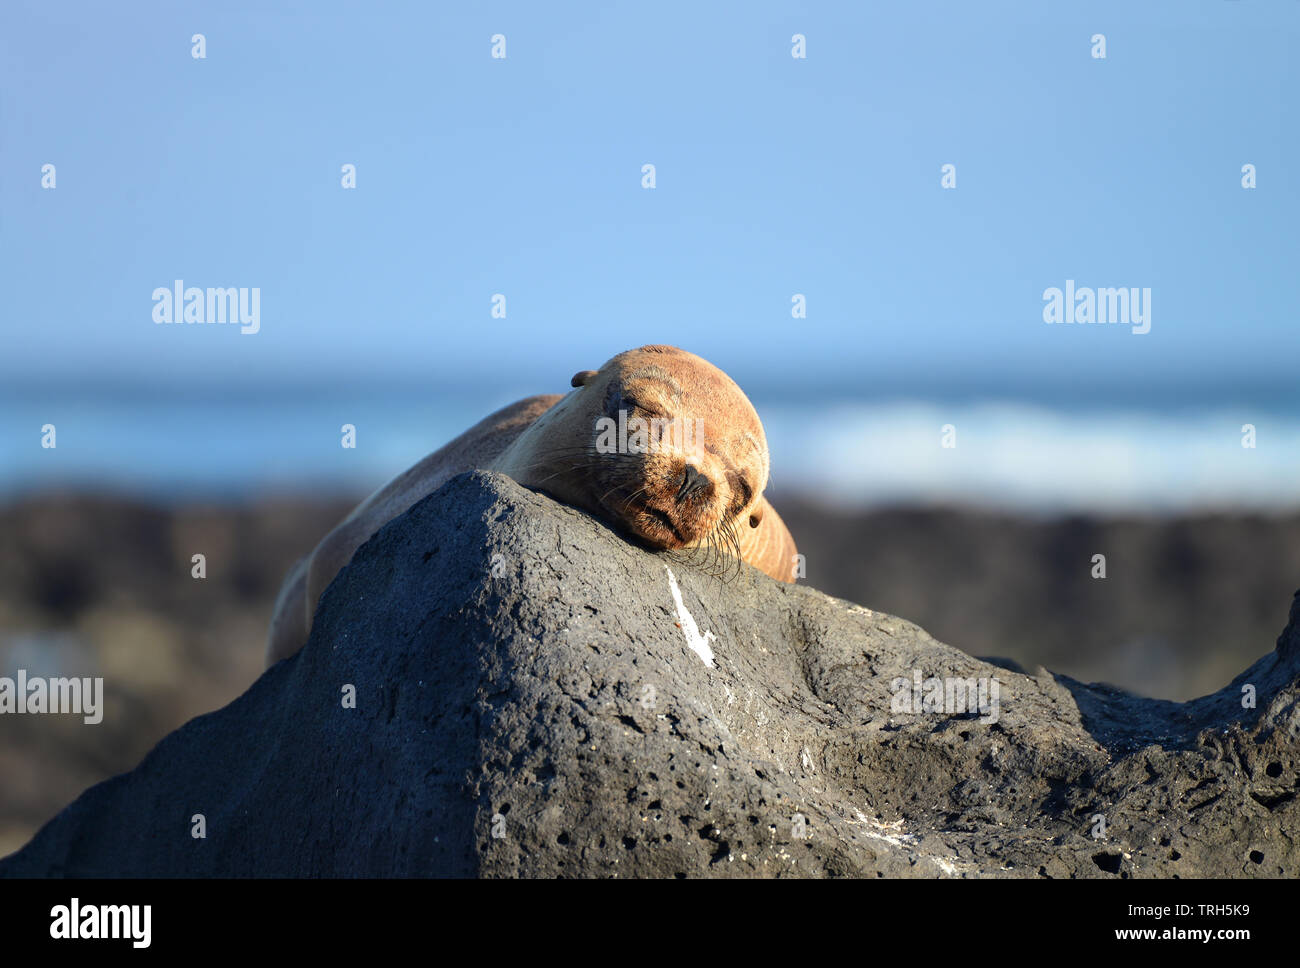 A peacefully sleeping Galapagos Sea Lion (Zalophus wollebaeki) with the face on a rock and the sea als background. Galapagos Islands, UNESCO World Her Stock Photo